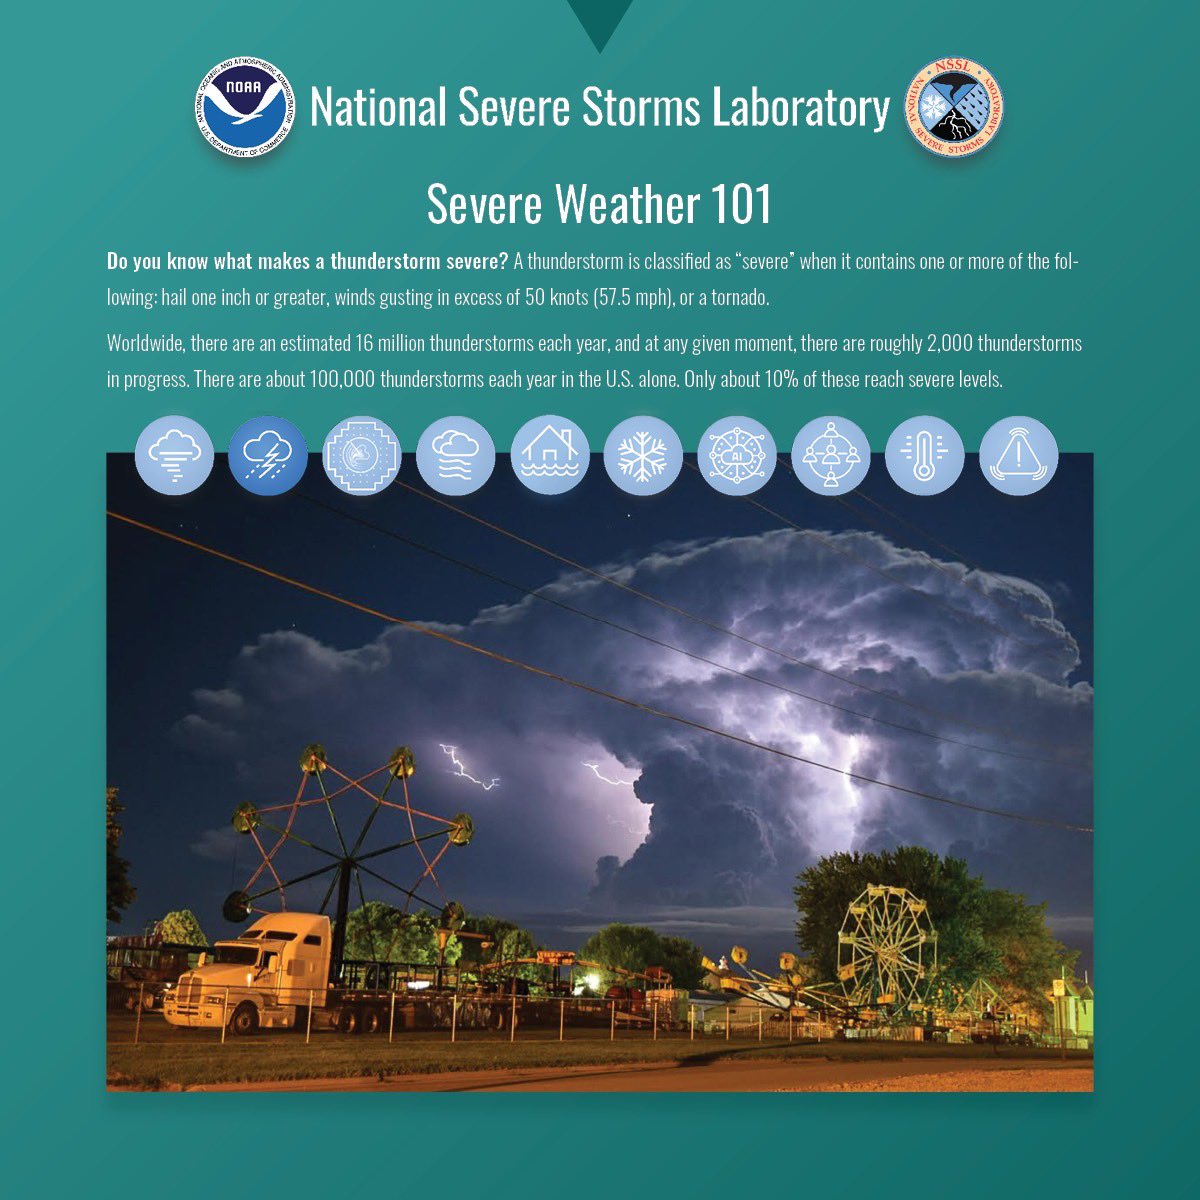 Time for some #SevereWeather101! ⛈️ Here’s what it takes for a storm to be considered “severe”: 🧊 hail one inch or greater 💨 winds gusting in excess of 50 knots (57.5 mph) 🌪️ a tornado Learn more about the 16 million thunderstorms that happen annually: nssl.noaa.gov/research/thund…